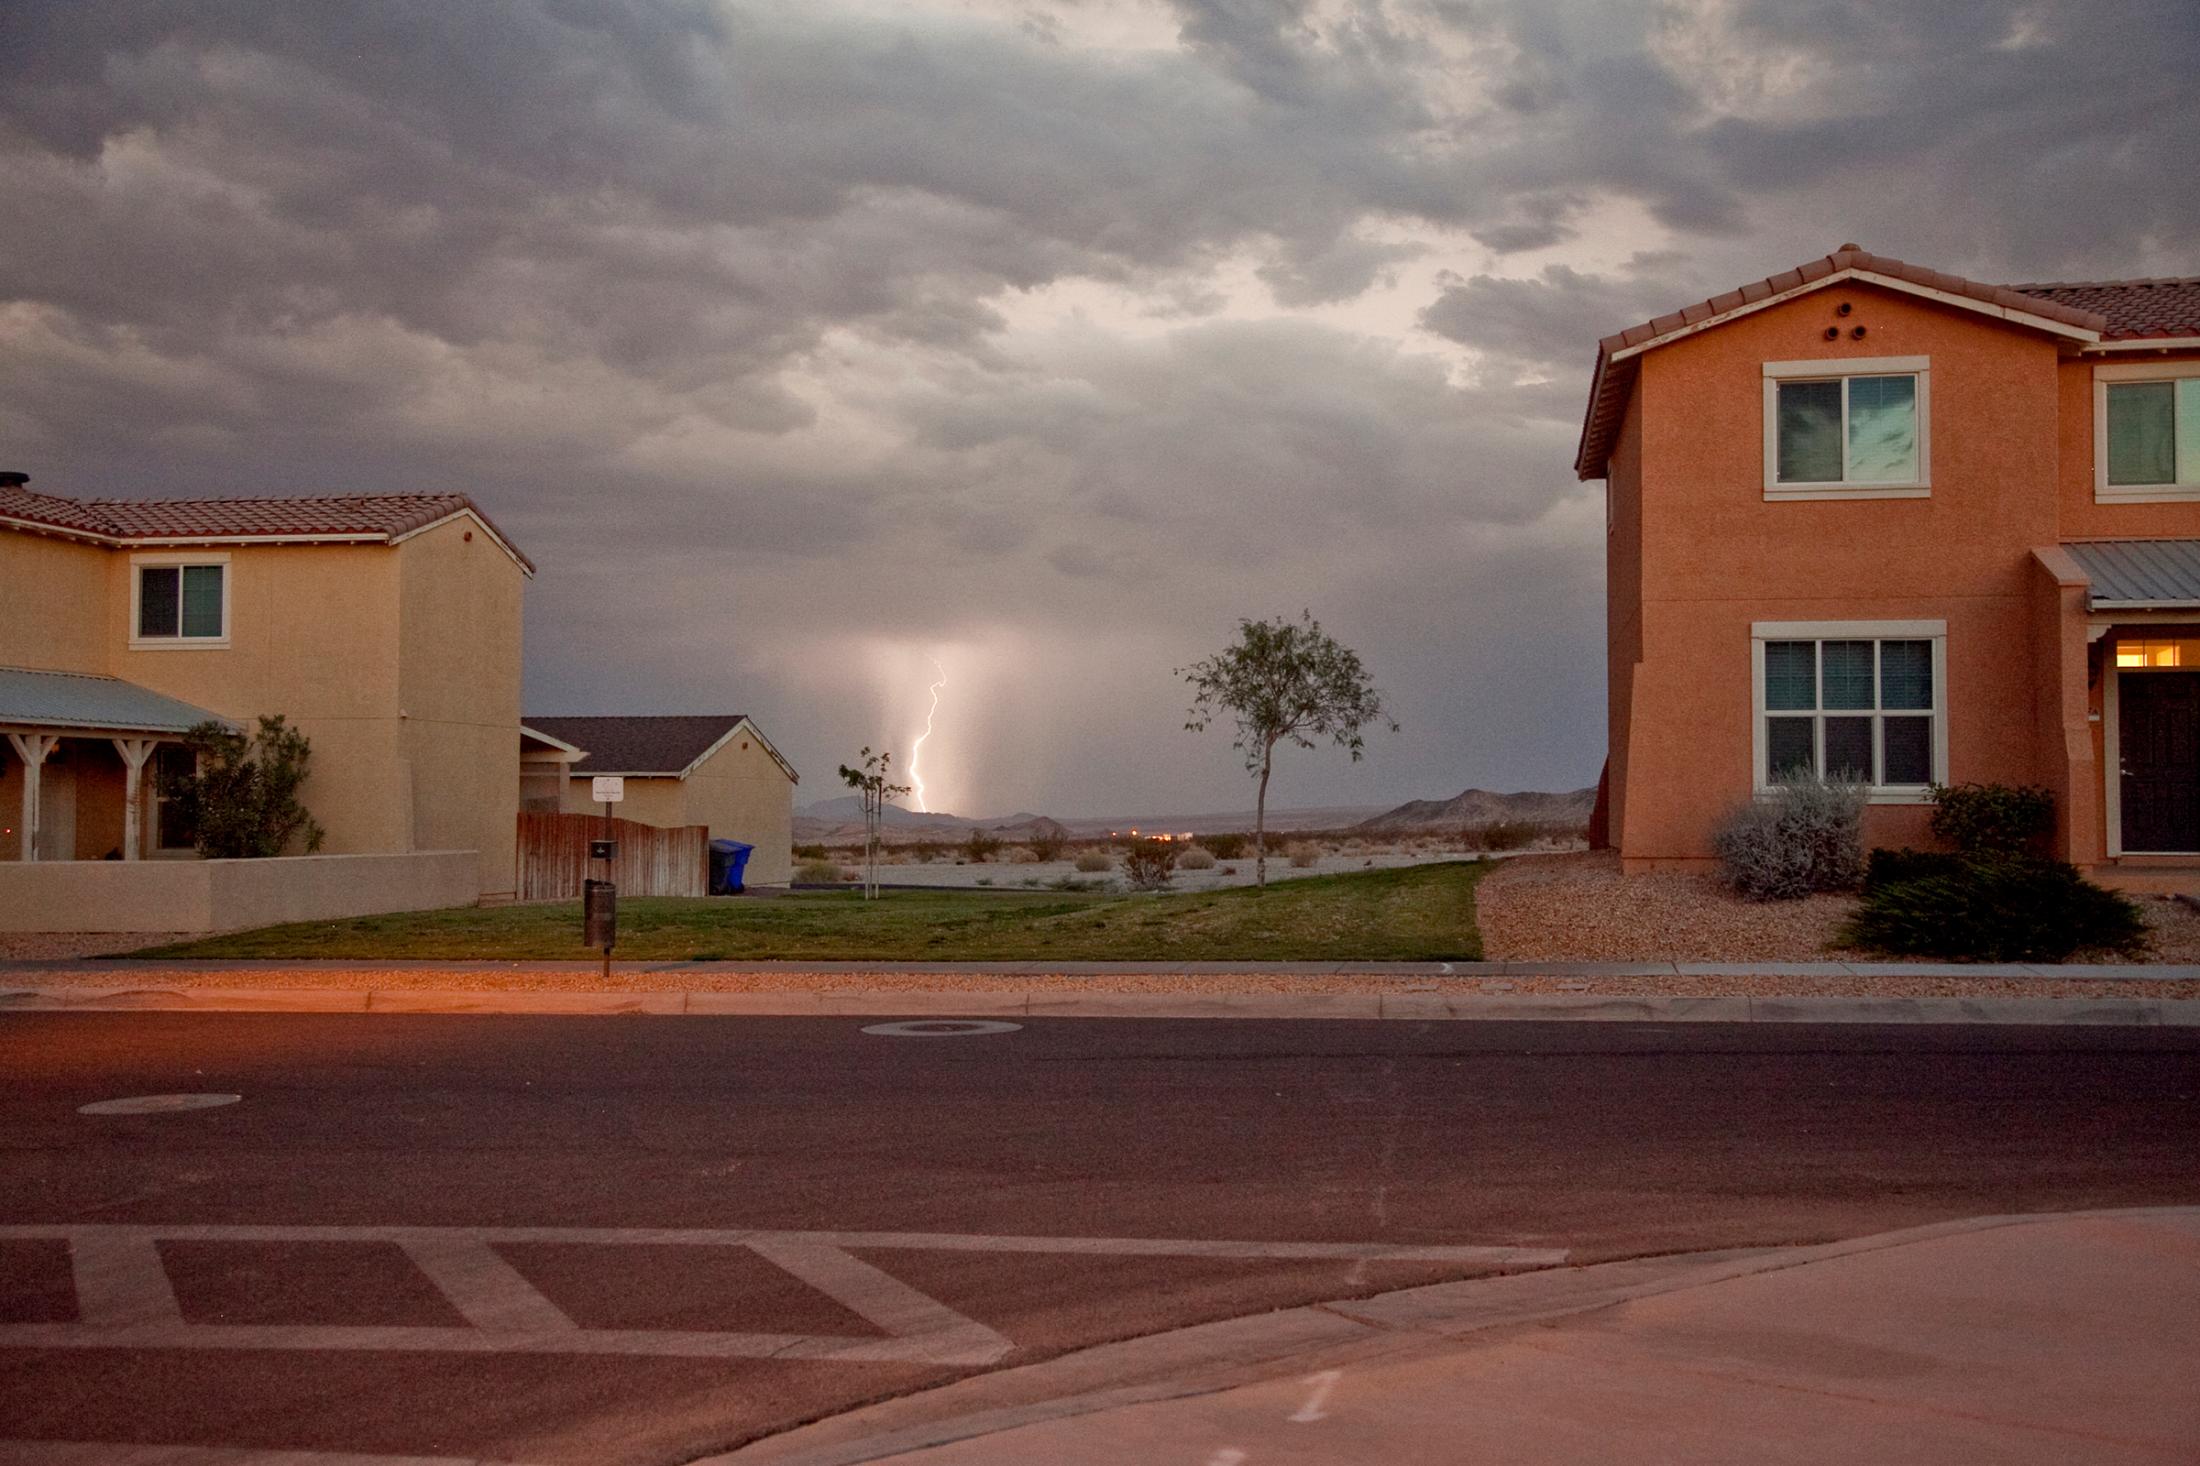 Happy Anniversary from Afghanistan - A lightning strike hits the training area in Fort Irwin,...